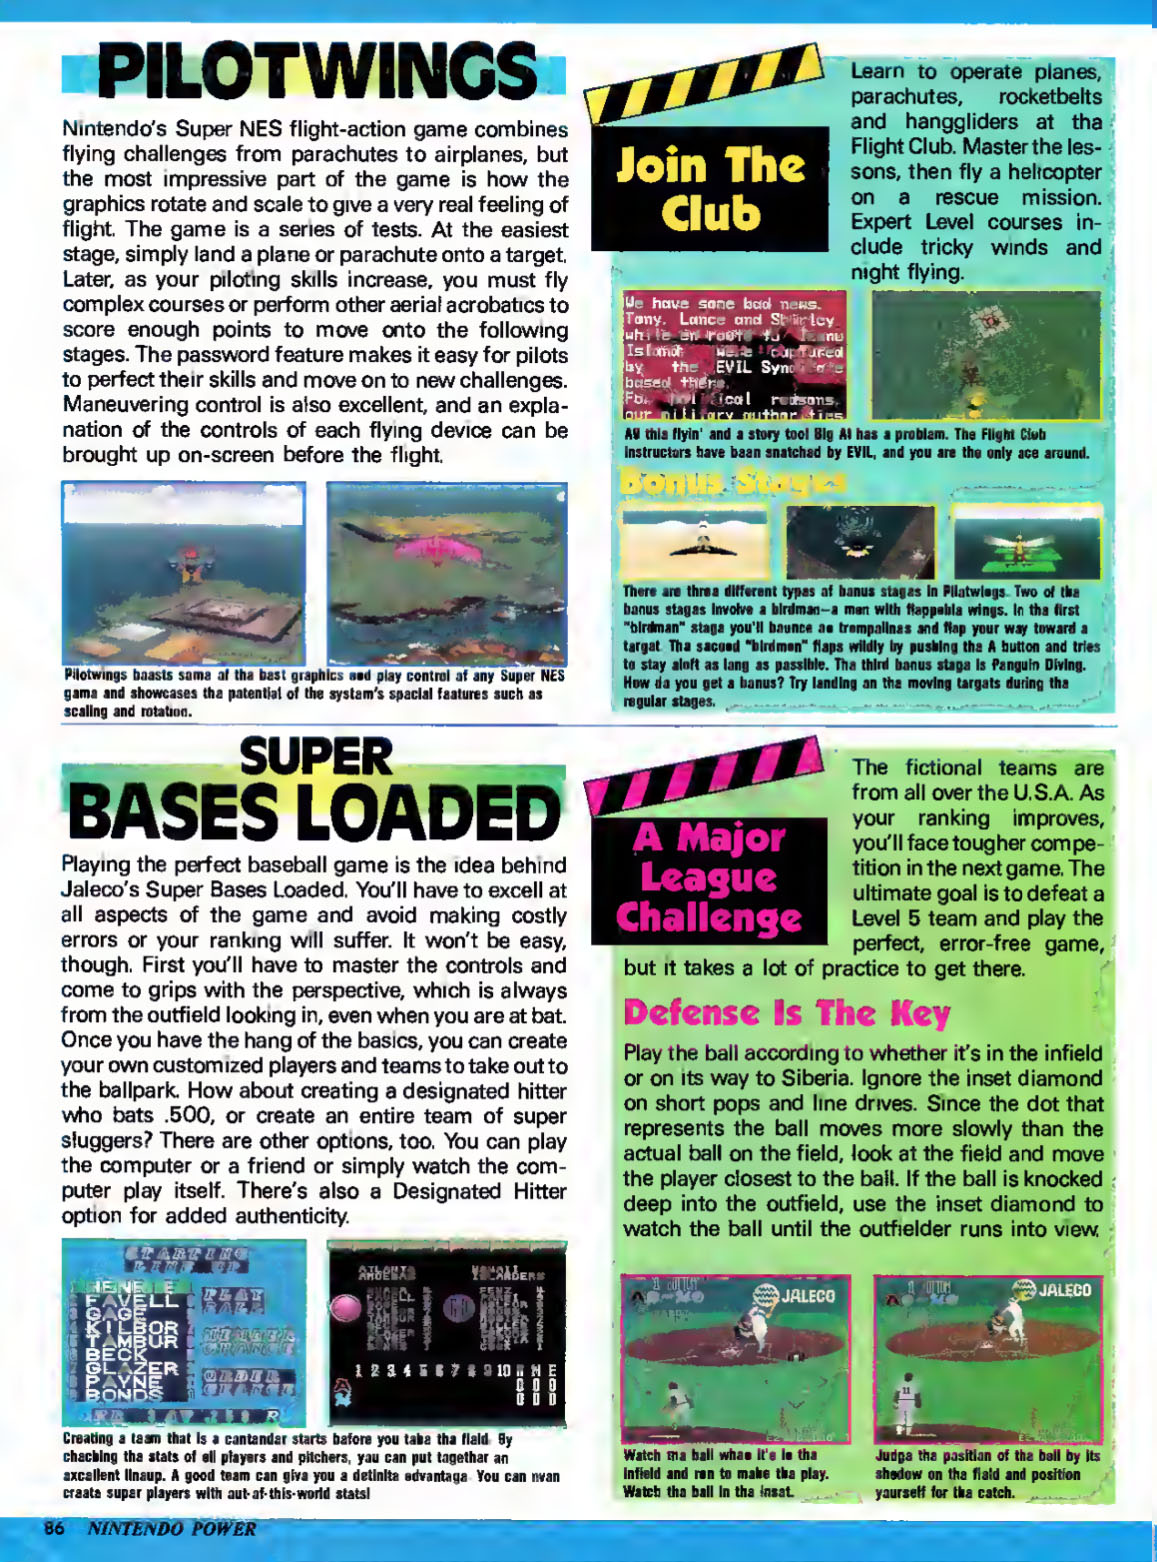 Super Bases Loaded Review, Nintendo Power October 1991 page 86